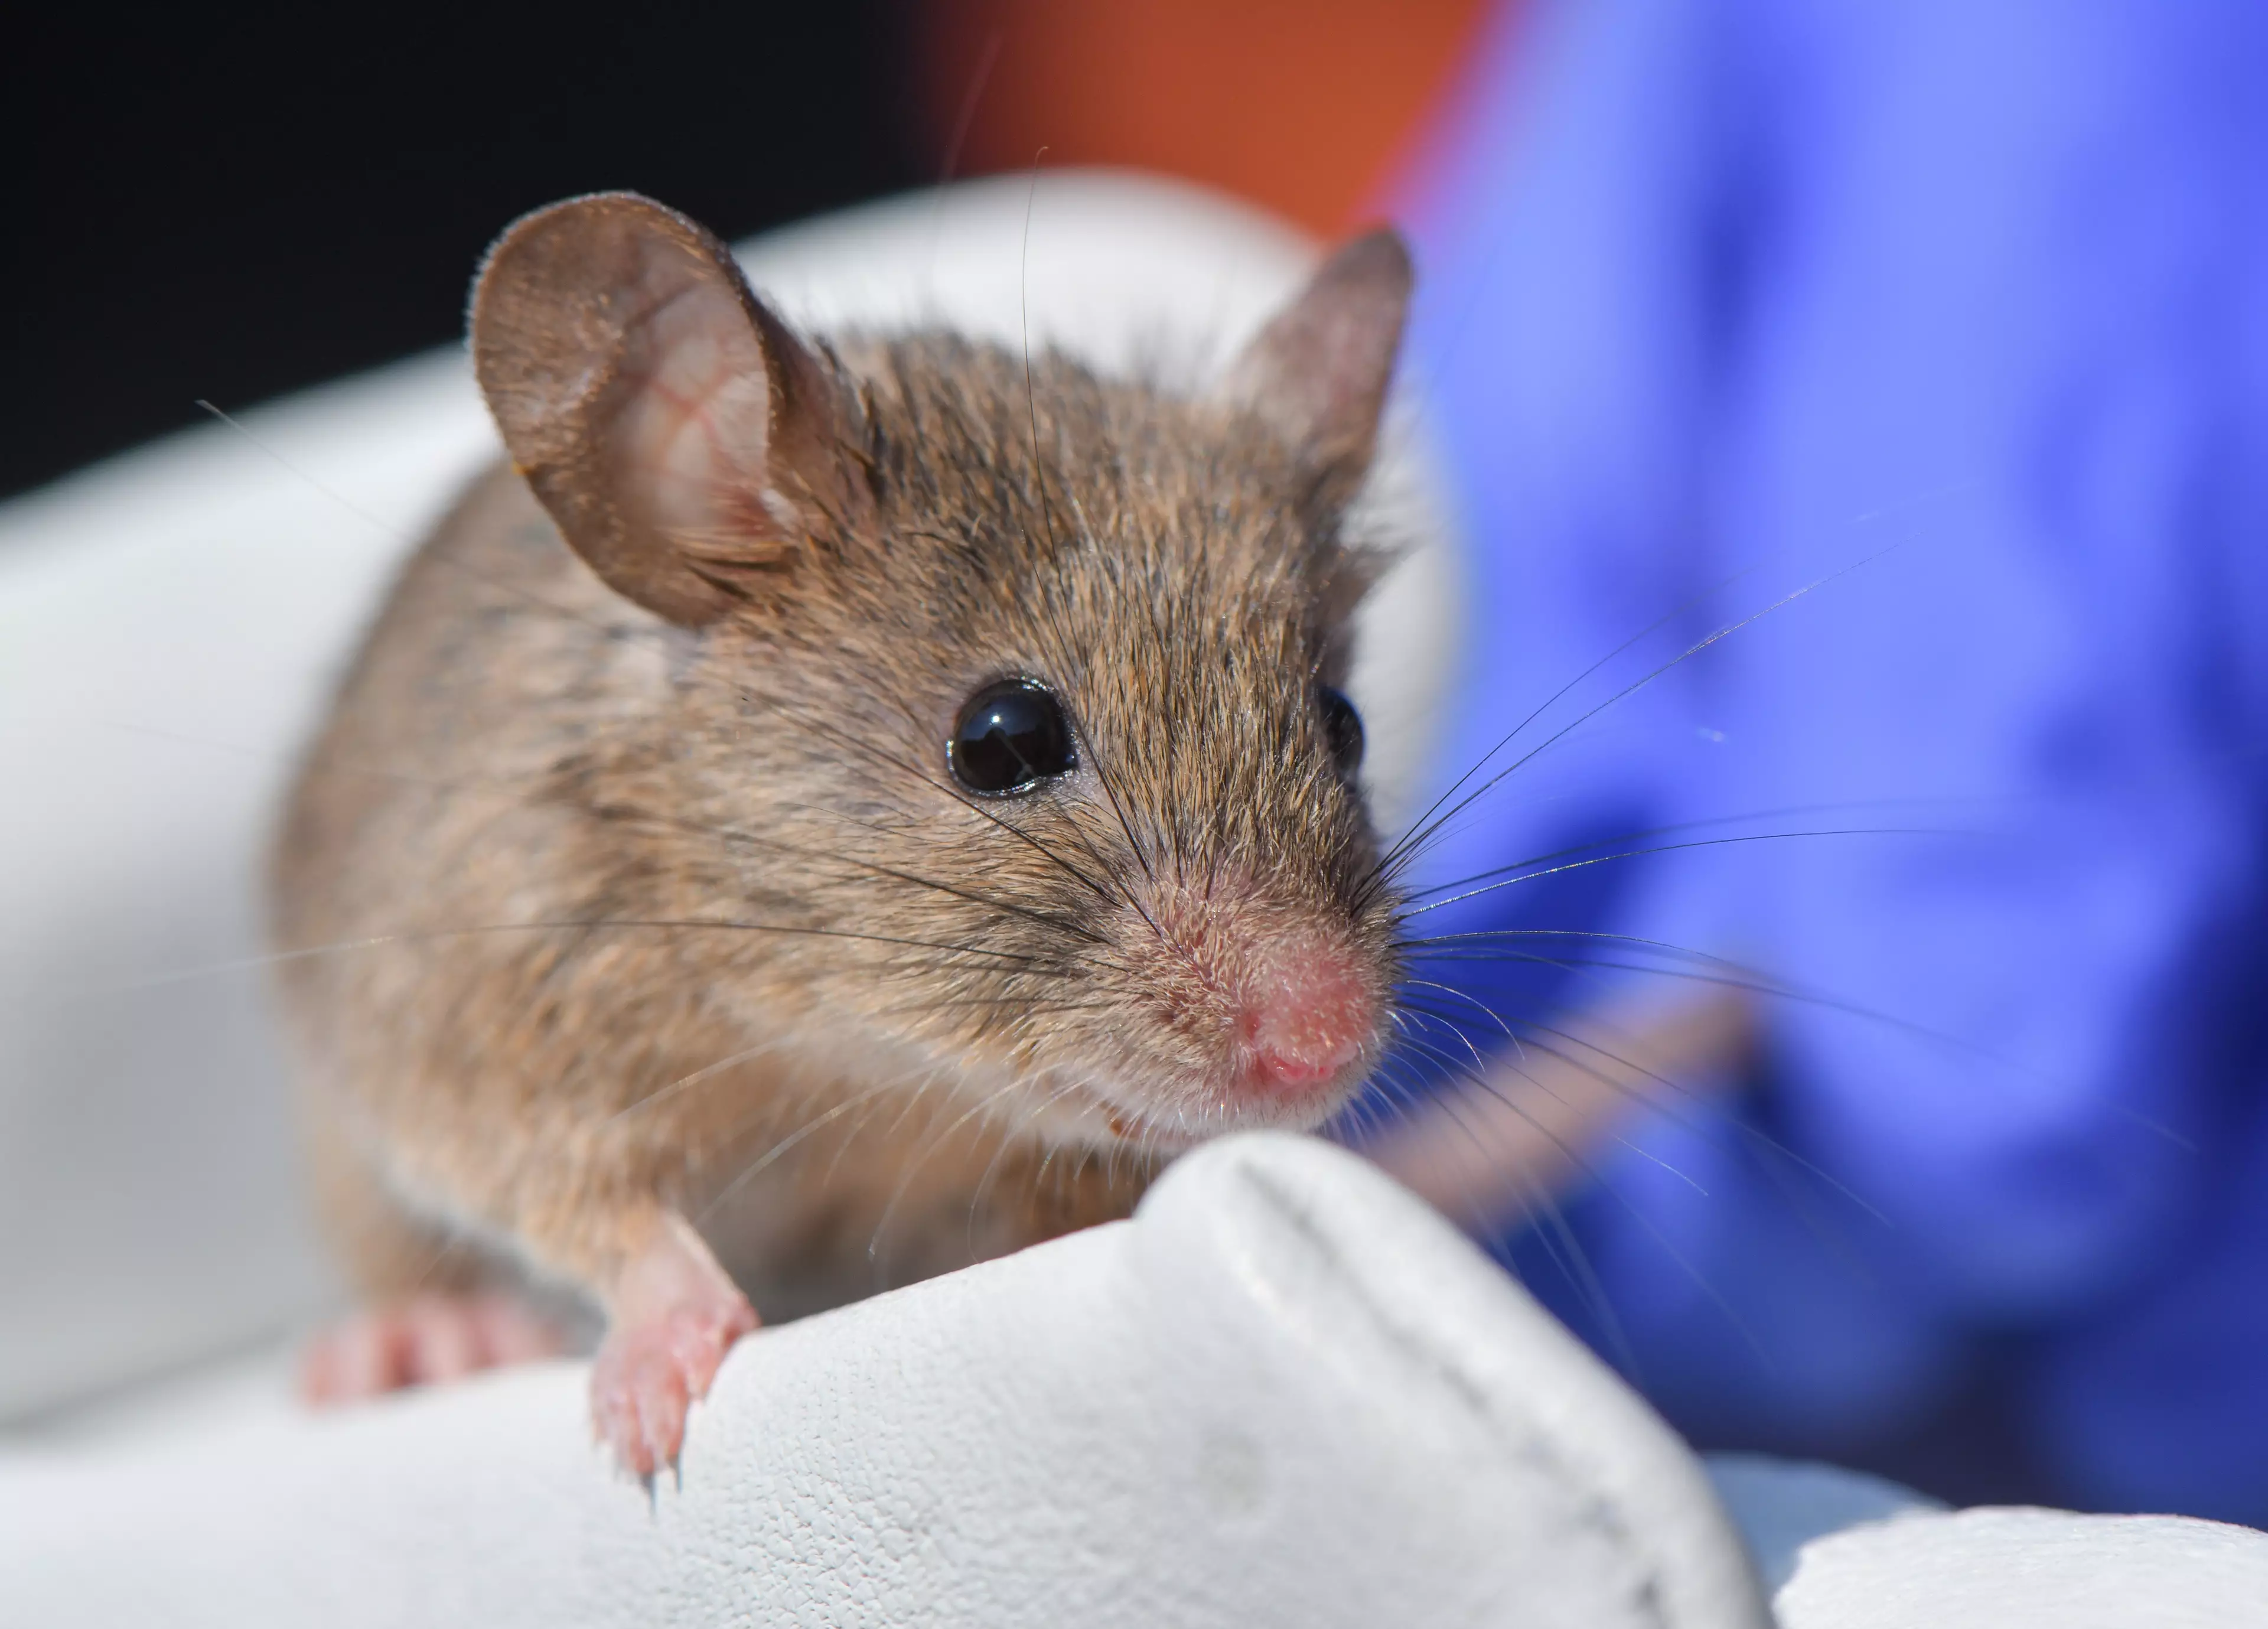 Scientists successfully cured mice of cervical cancer